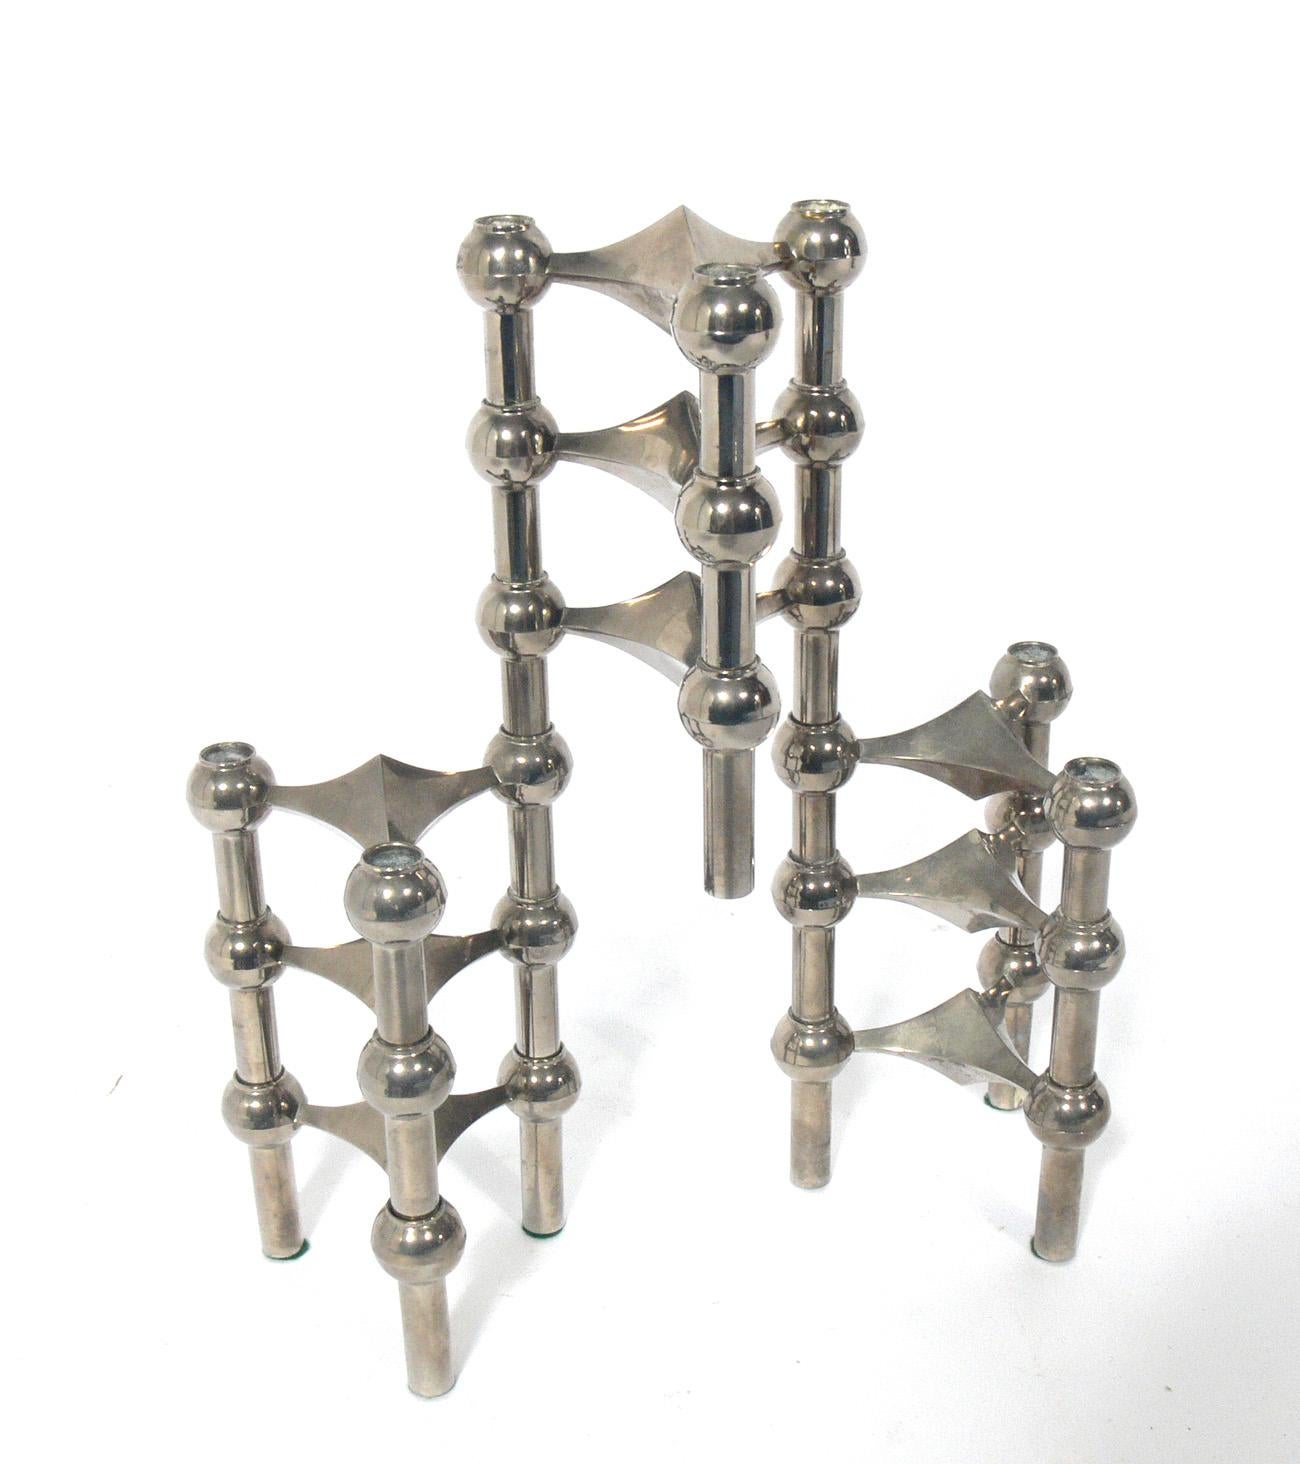 Group of sculptural interlocking candlesticks, designed by Ceasar Stoffi for Nagel AG, Germany, circa 1960s. This group includes nine individual candleholders, which can be used individually, or stacked in various configurations.